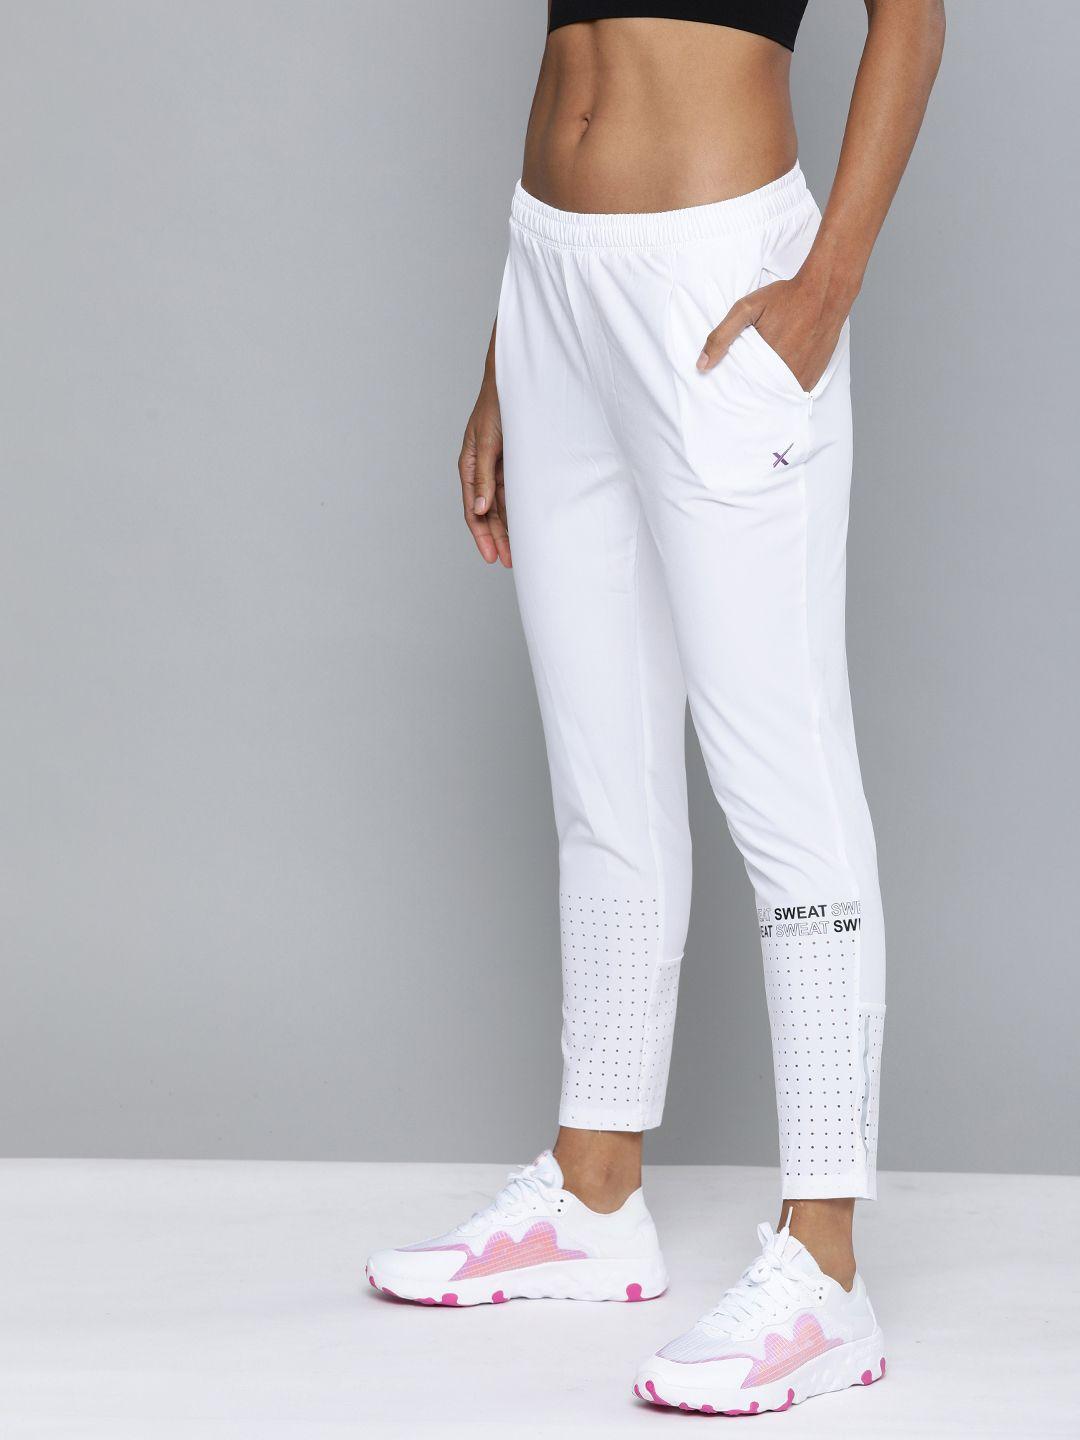 hrx-by-hrithik-roshan-women-white-solid-slim-rapid-dry-antimicrobial-training-track-pants